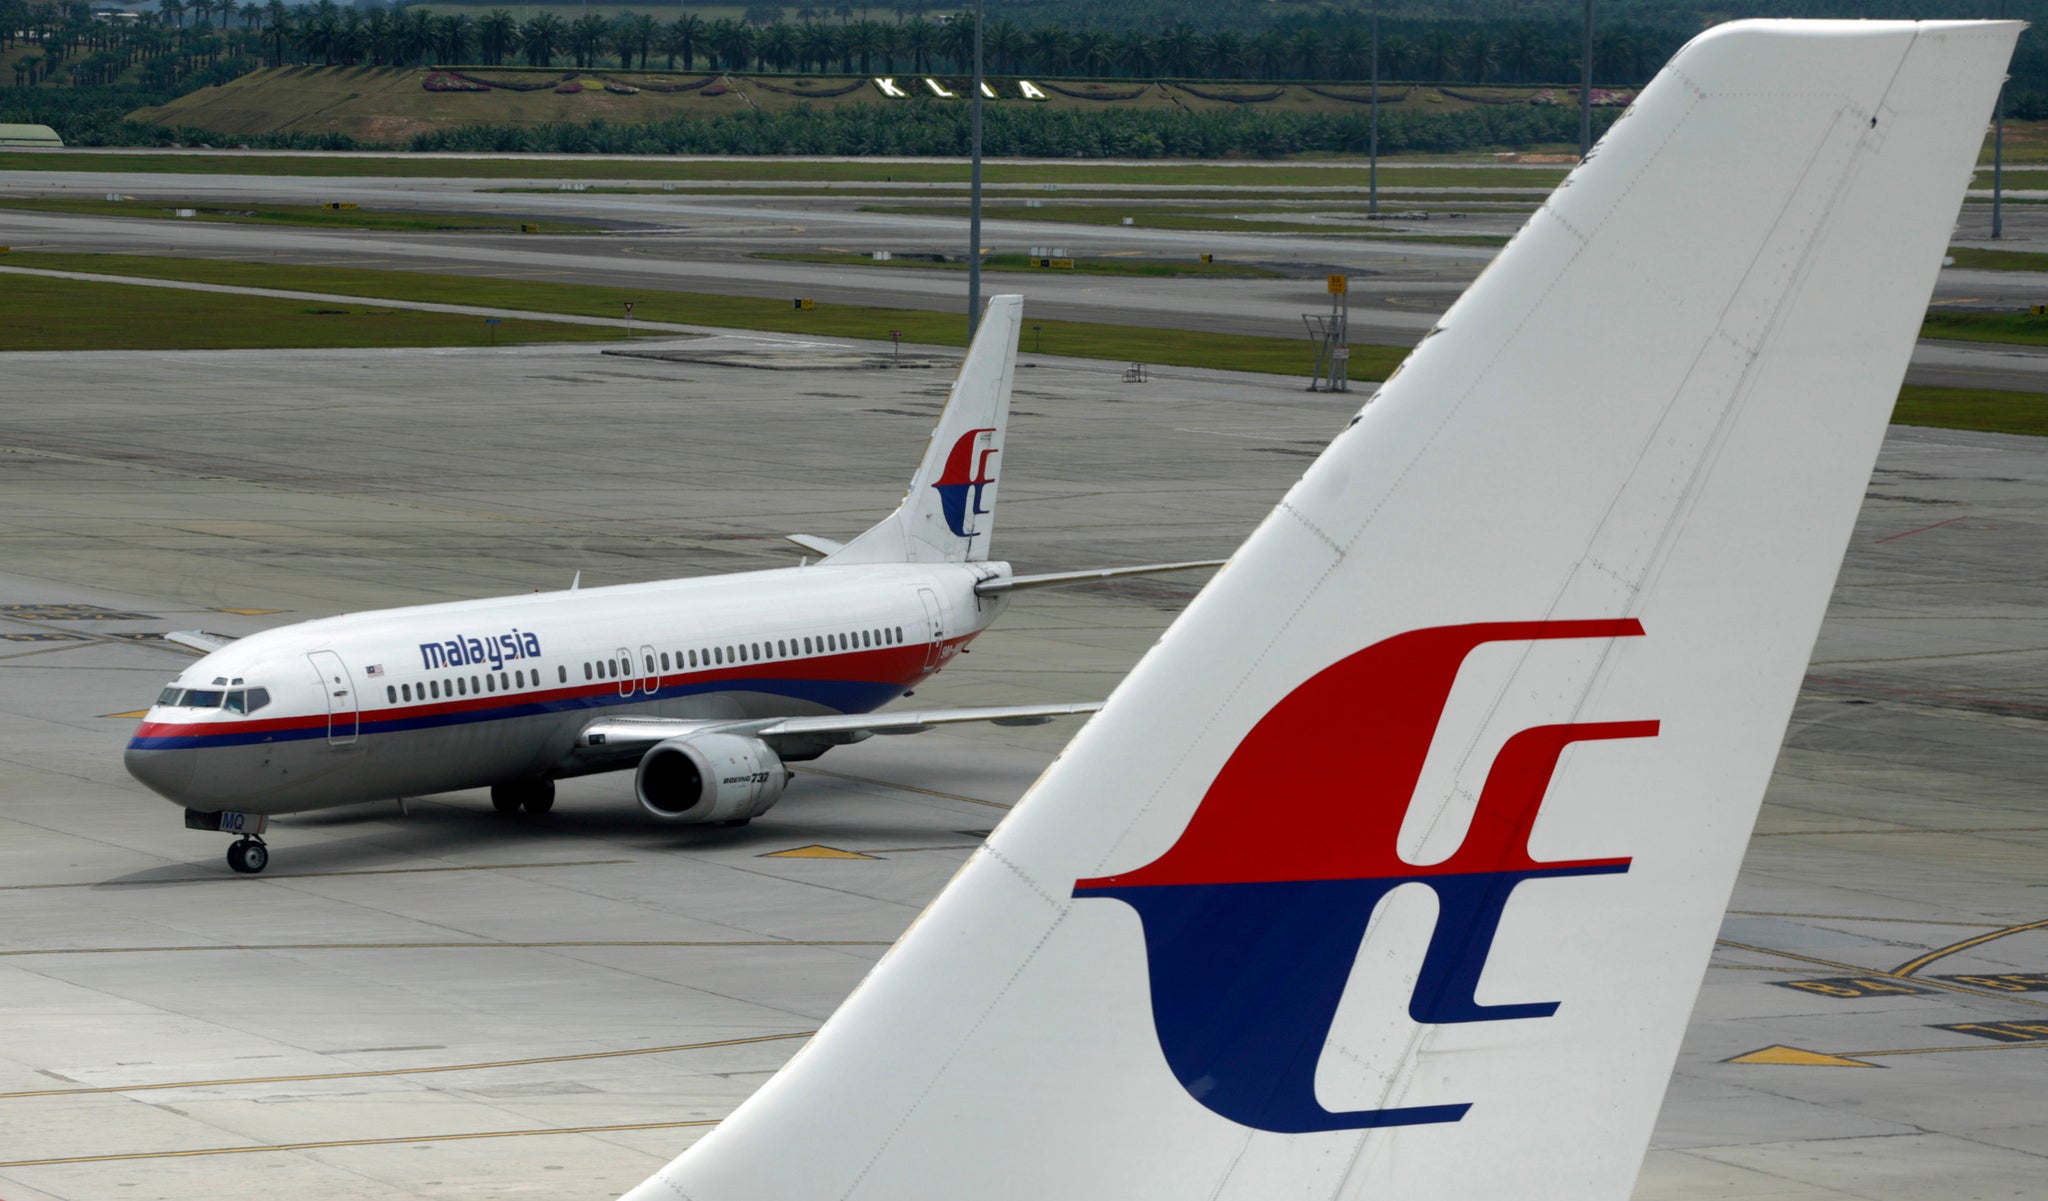 A Malaysia Airlines flight had to return to Kuala Lumpur after suffering cabin pressure problems